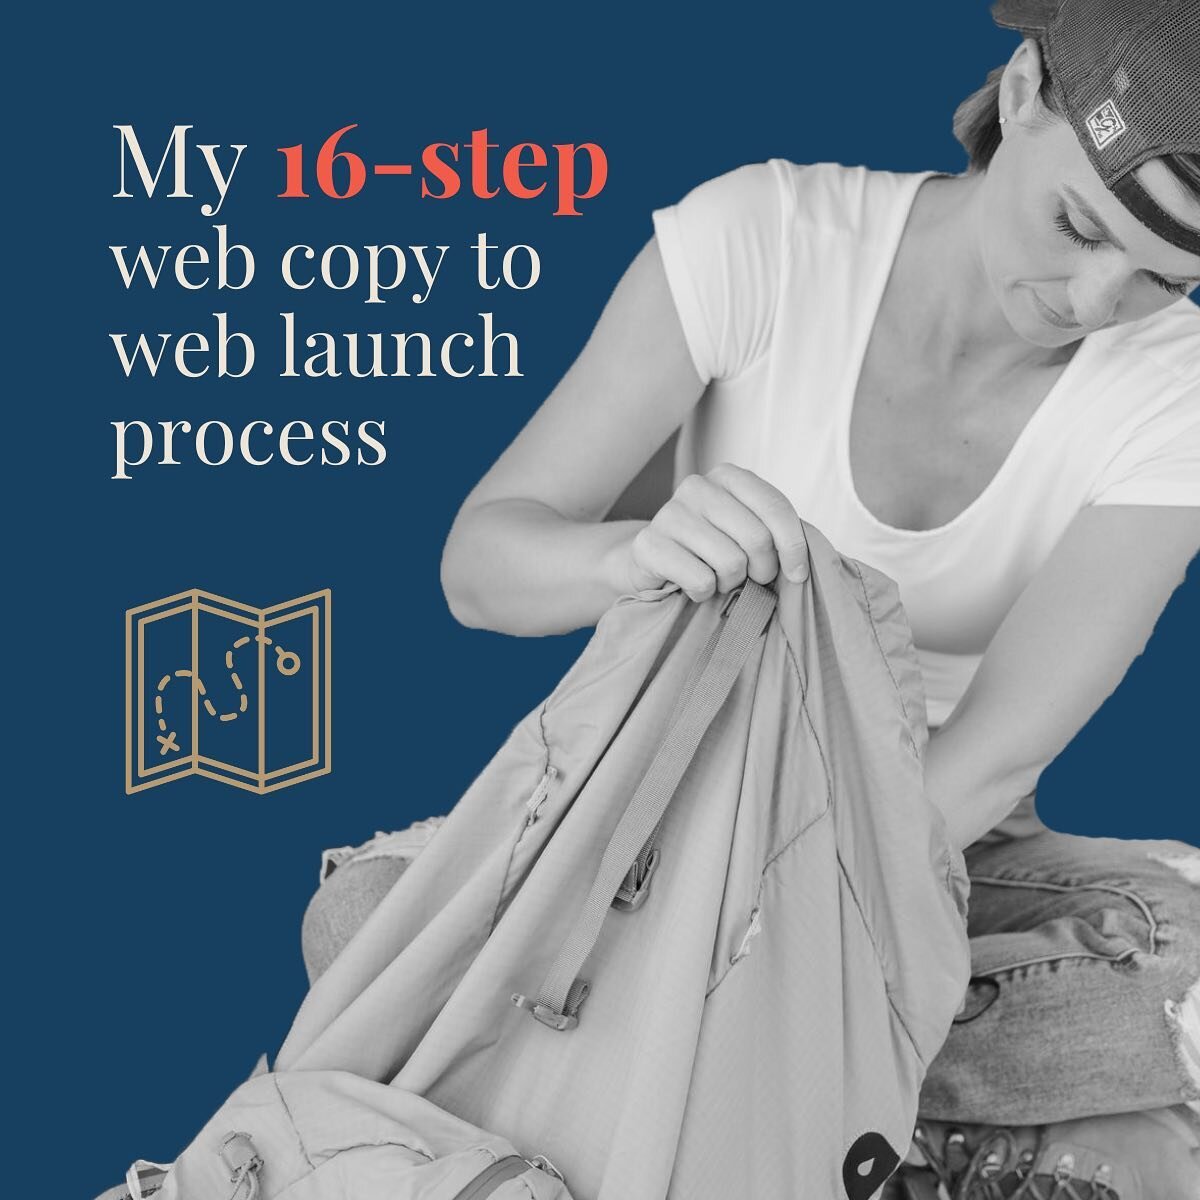 PART ONE:

Writing web copy doesn't start until Step 8. 
And I check in with the client 4-5 times.
Seems excessive, right?

Well, it is. For some businesses. I'm not going to suggest this for an HVAC company.

But for others, the setup is the most im